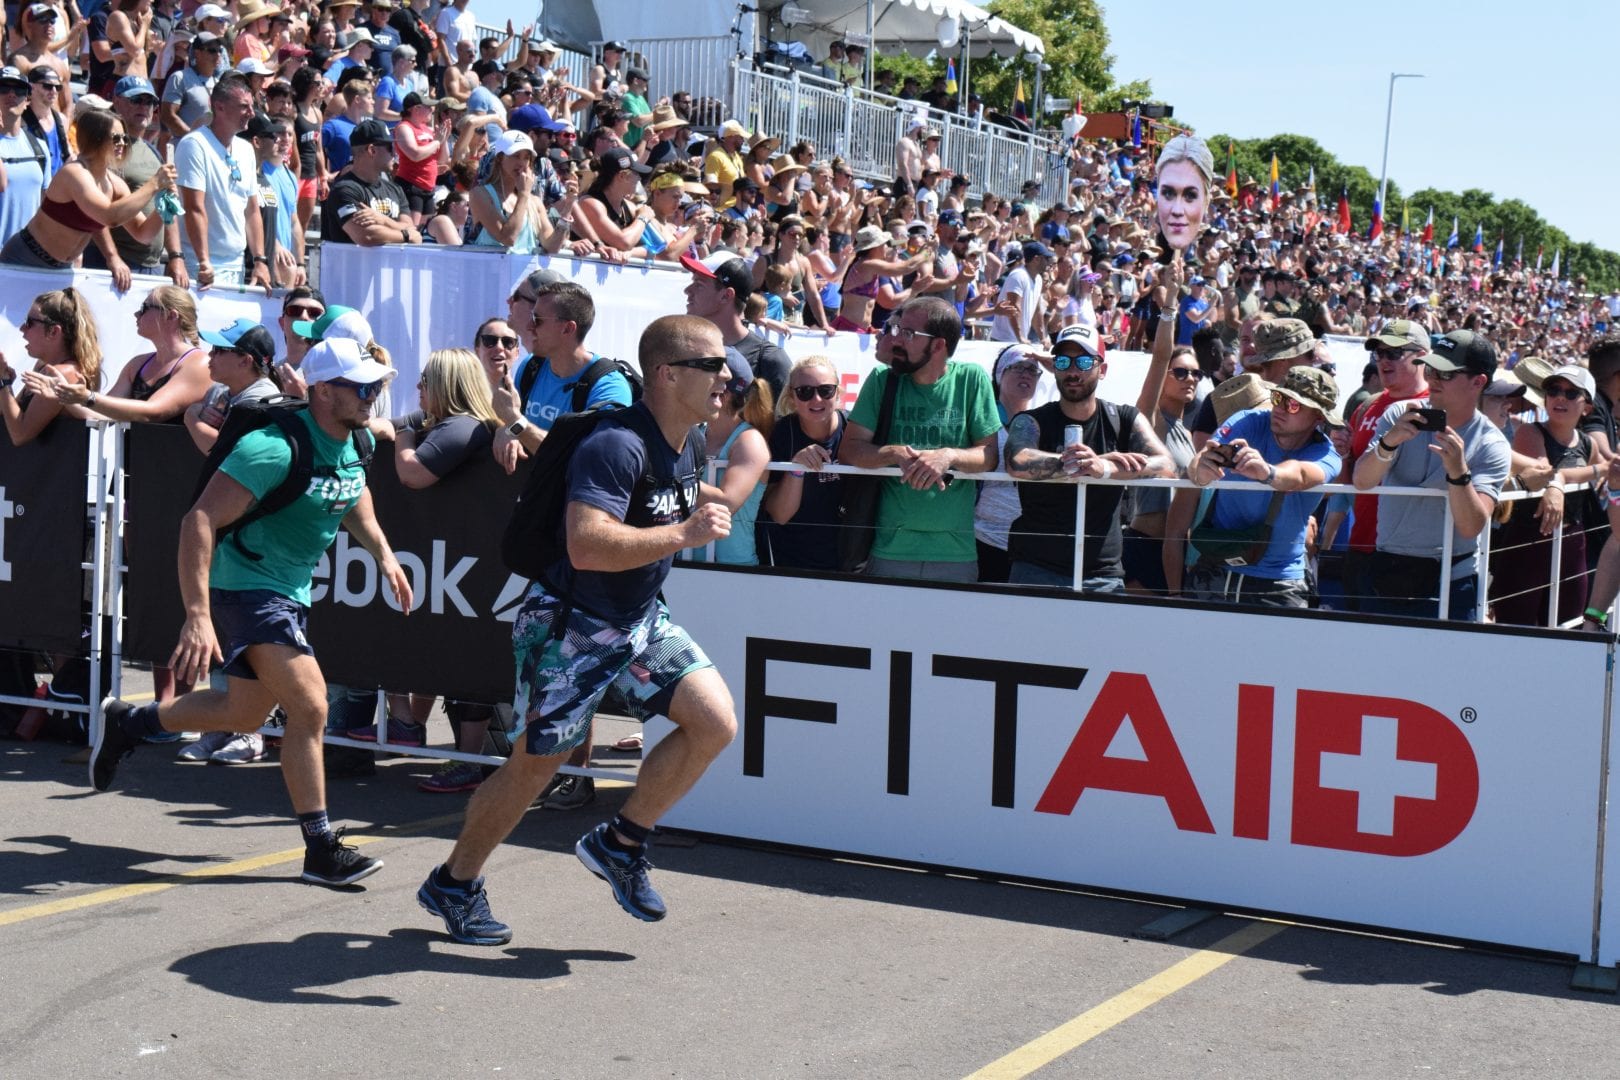 Scott Panchik and other athletes complete the Ruck Run event at the 2019 CrossFit Games